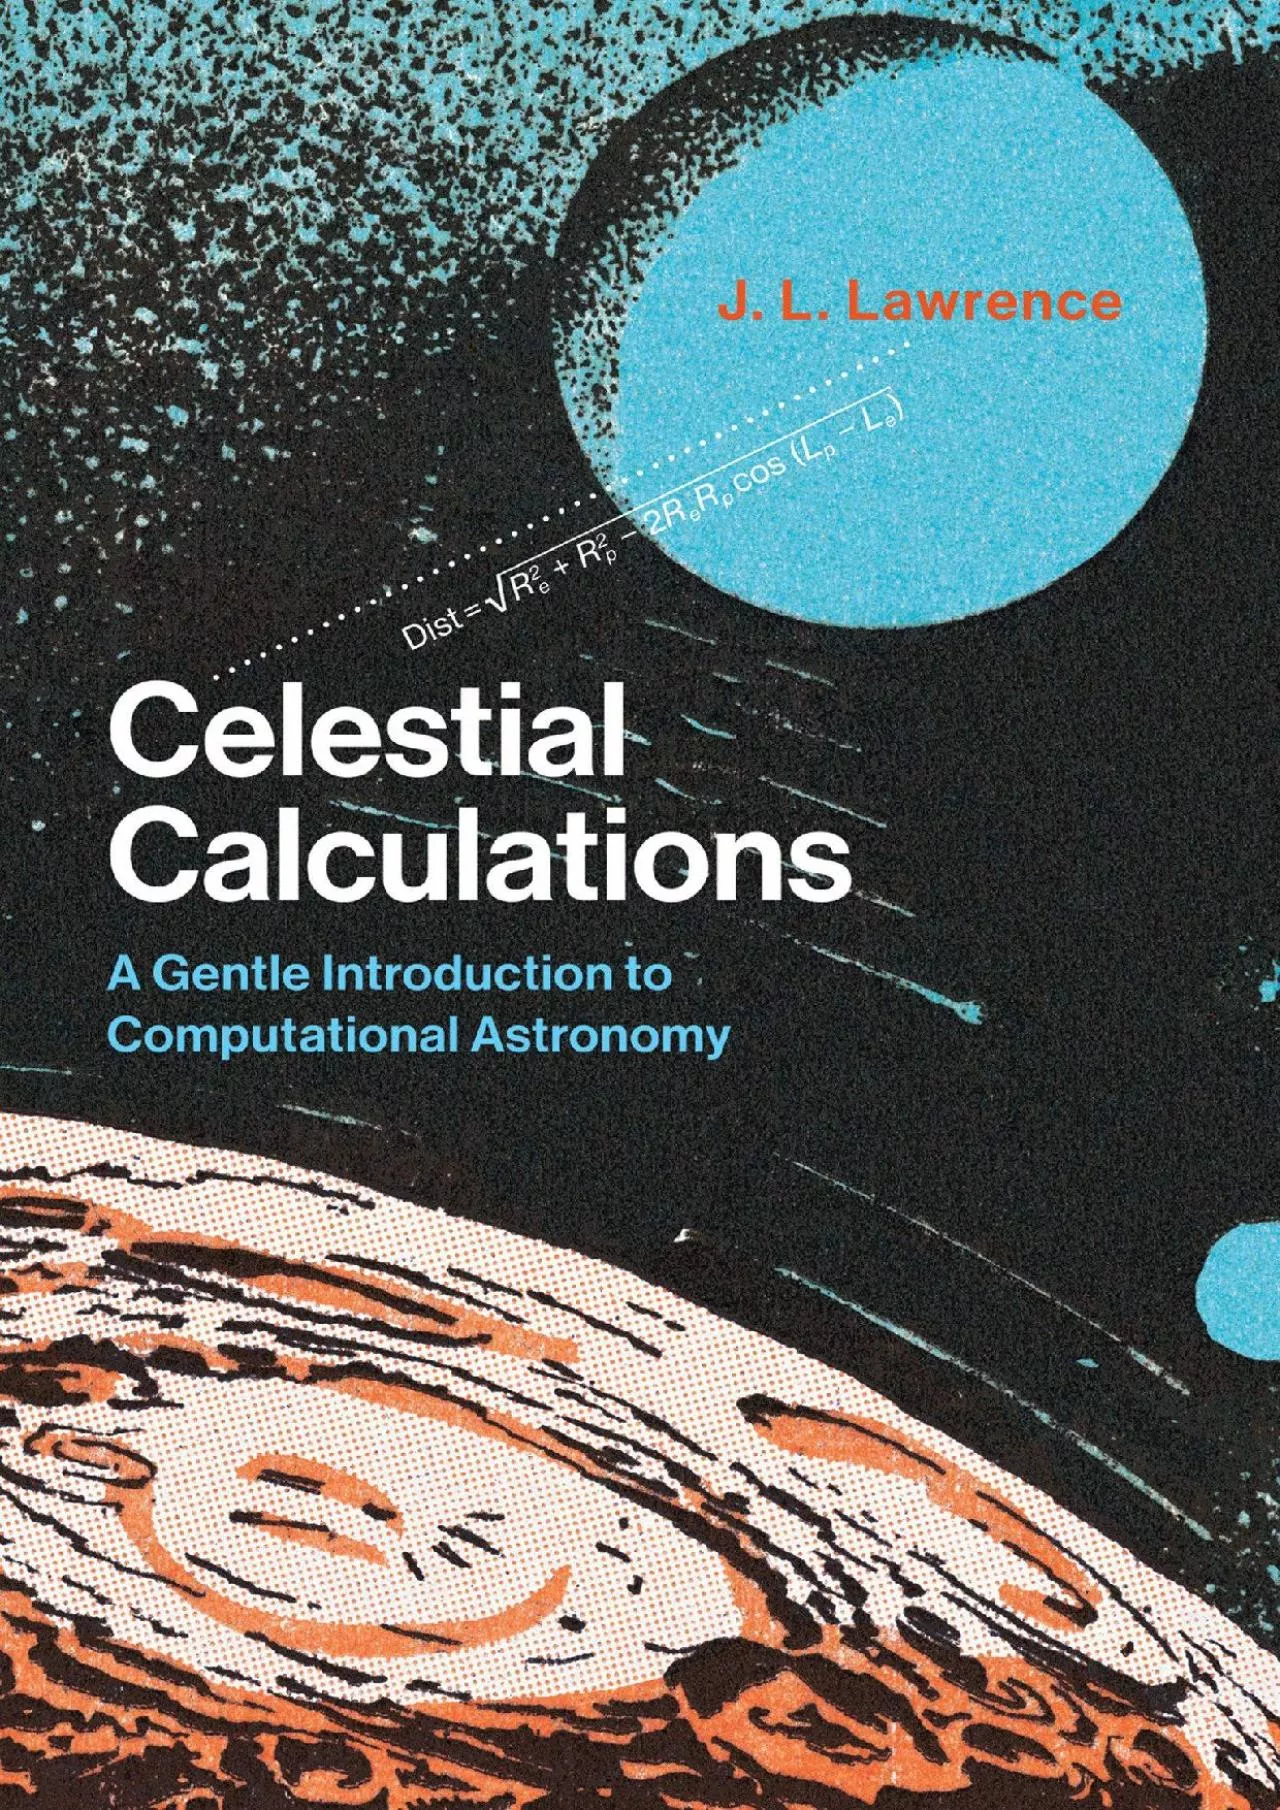 (BOOK)-Celestial Calculations: A Gentle Introduction to Computational Astronomy (The MIT